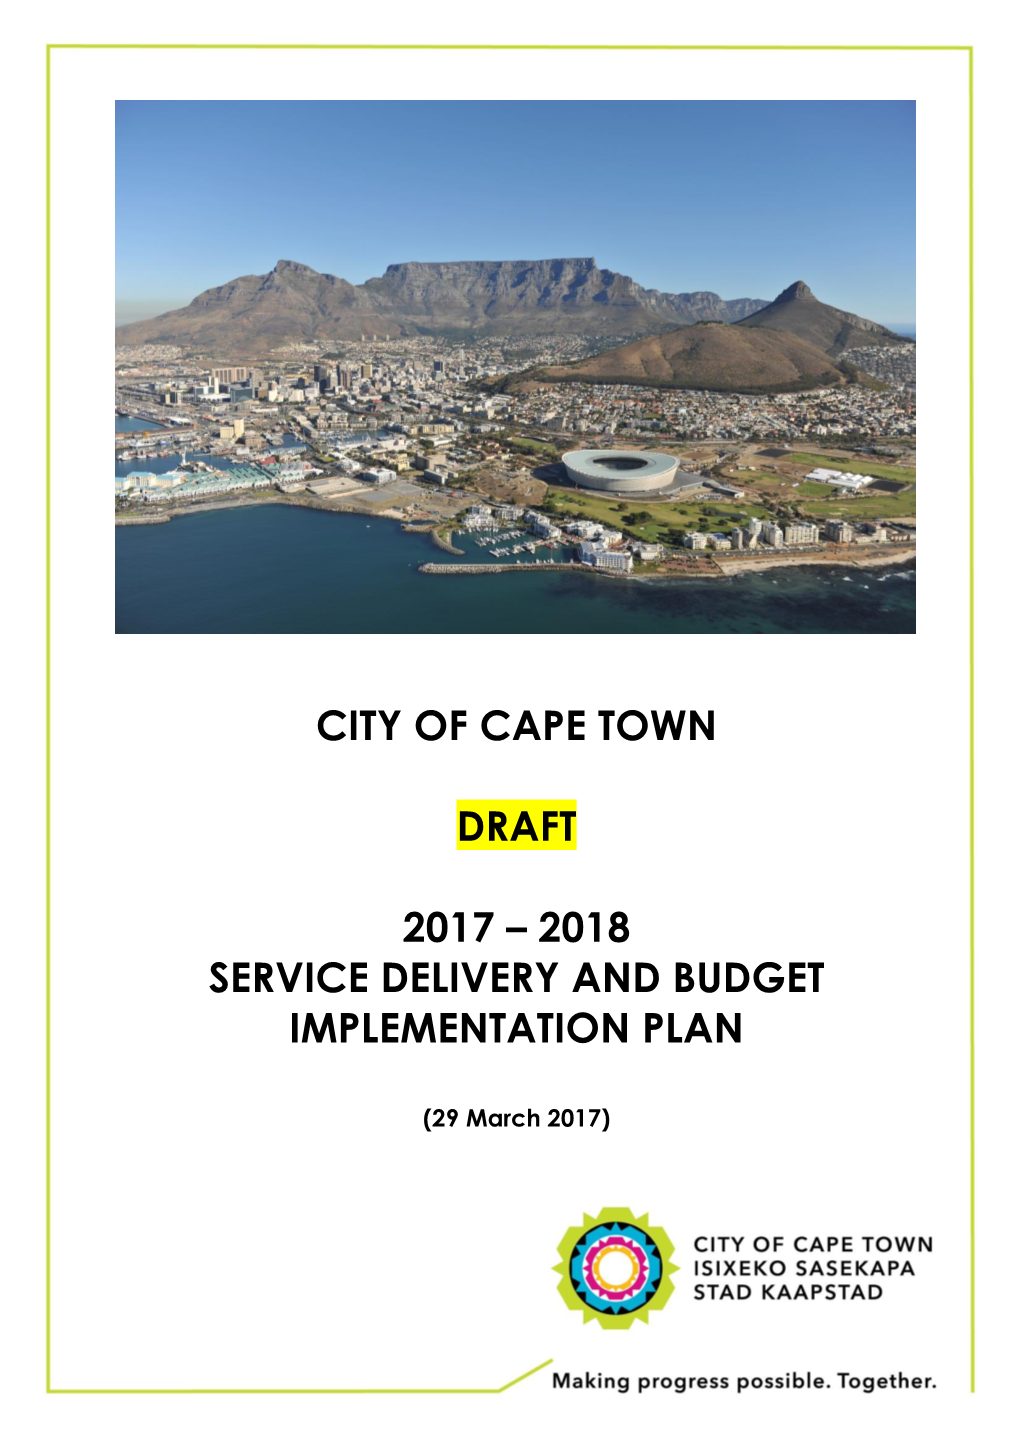 City of Cape Town Draft 2017 – 2018 Service Delivery and Budget Implementation Plan